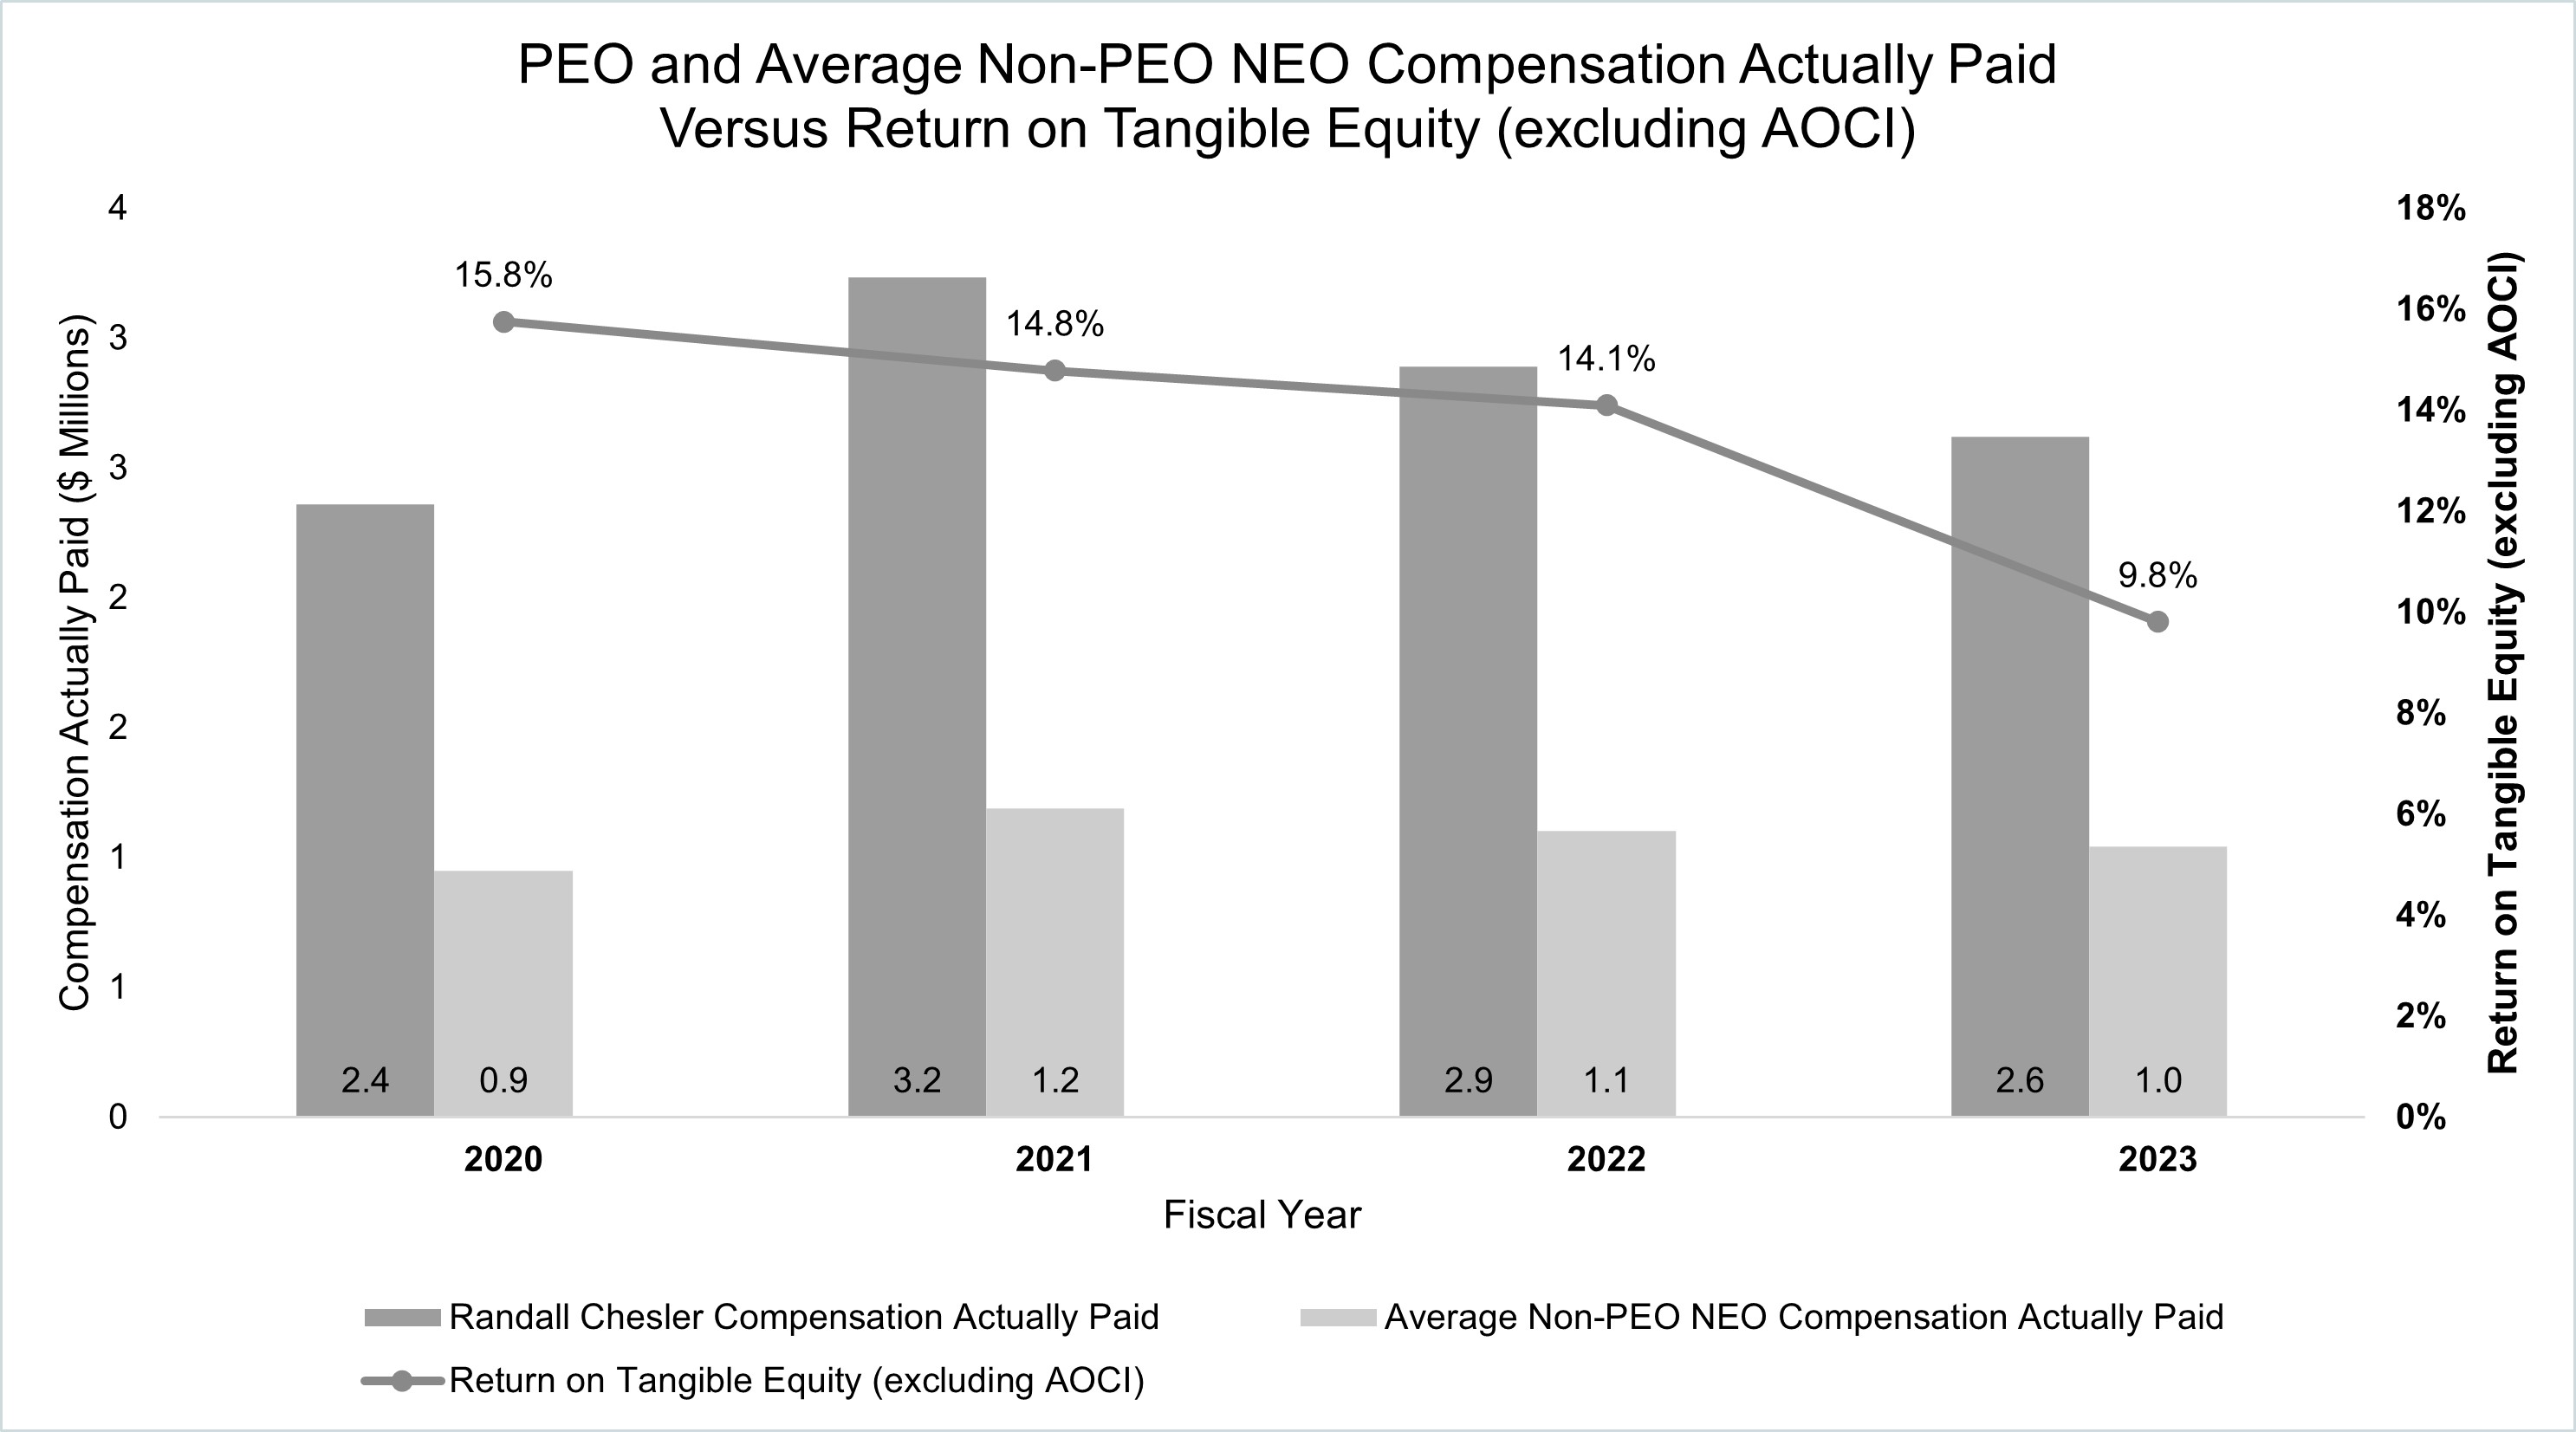 PEO and Average Non-PEO NEO Compensation paid vs ROTE bw.jpg